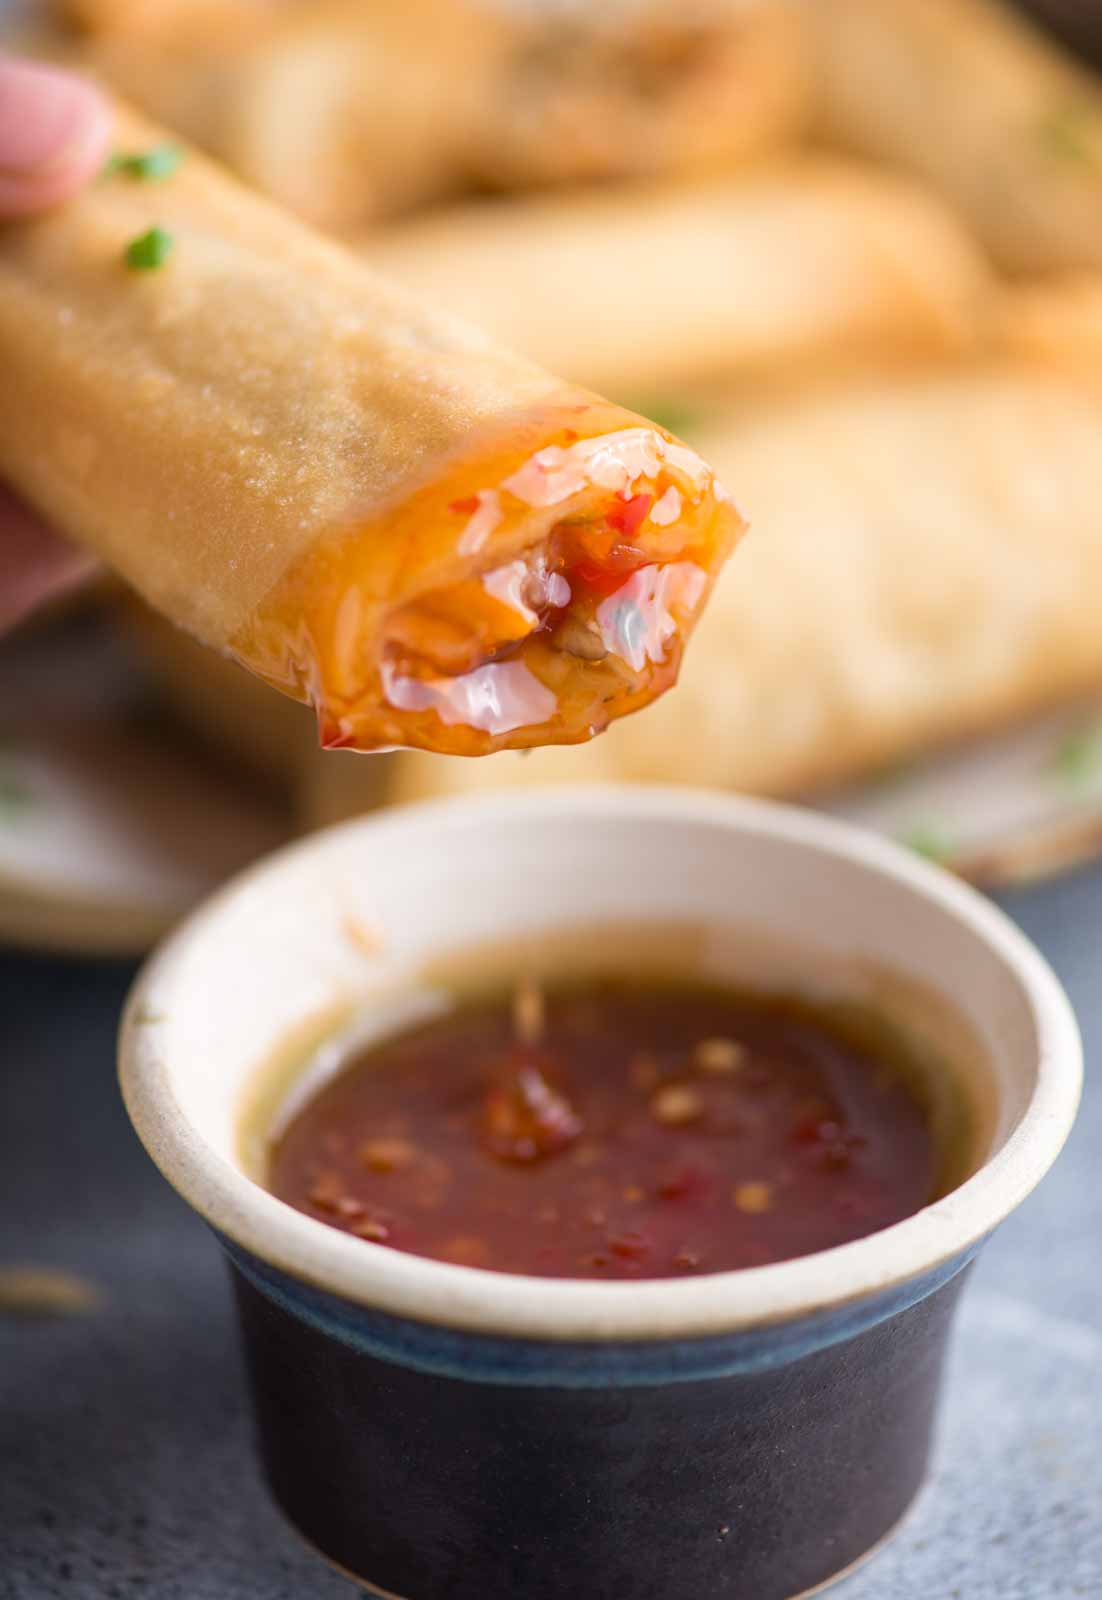 Shot of a crispy chicken spring roll after dipped in sauce and a bite taken.